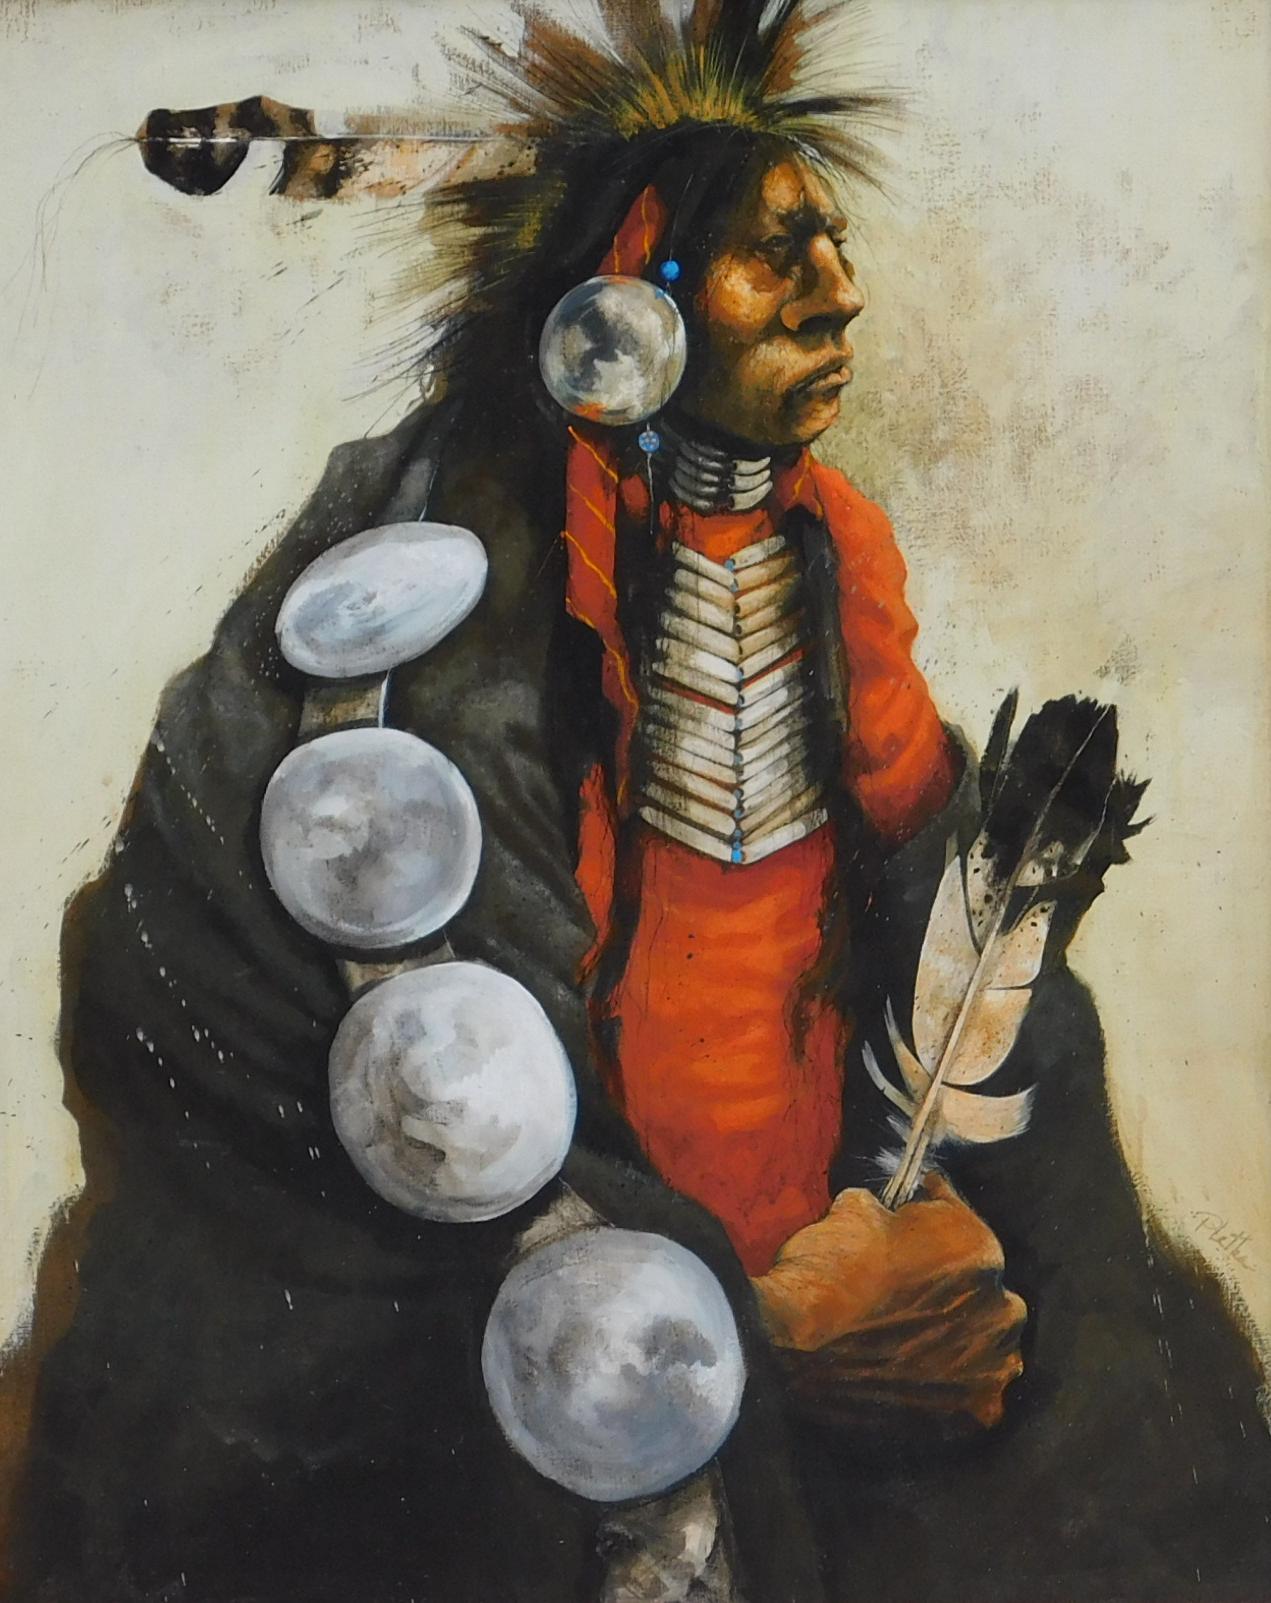 California/New Mexico artist Paul Pletka (b. 1946) Acrylic on Canvas, 1972.
Native American subject in Decorative Hair Plates. Signed lower right.
Titled in pencil on the verso by the artist: “Omaha Dancer.”
Measures: 30